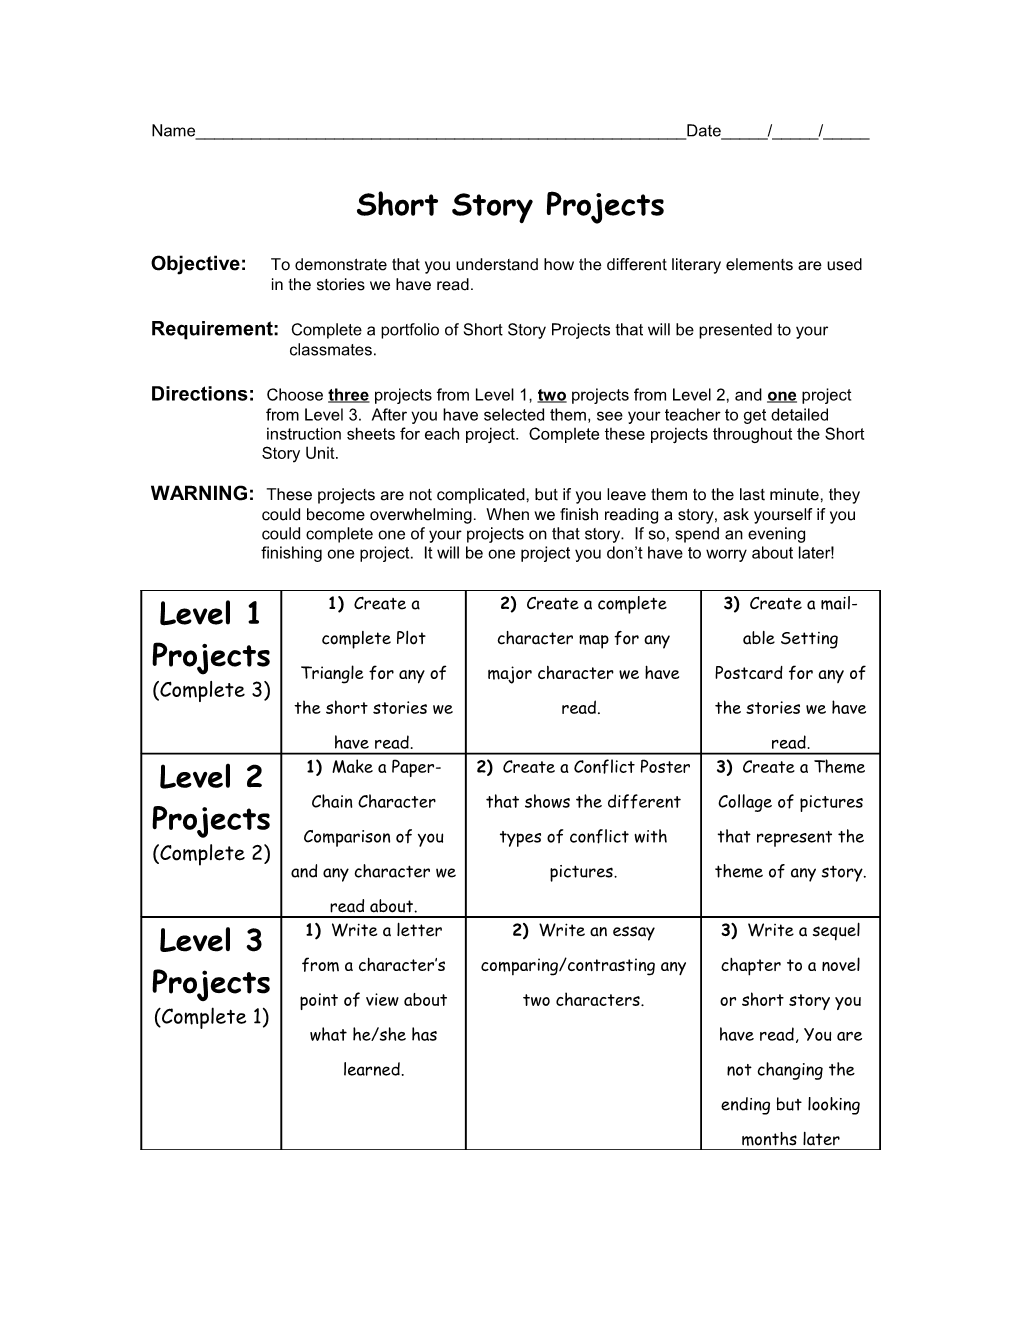 Short Story Projects